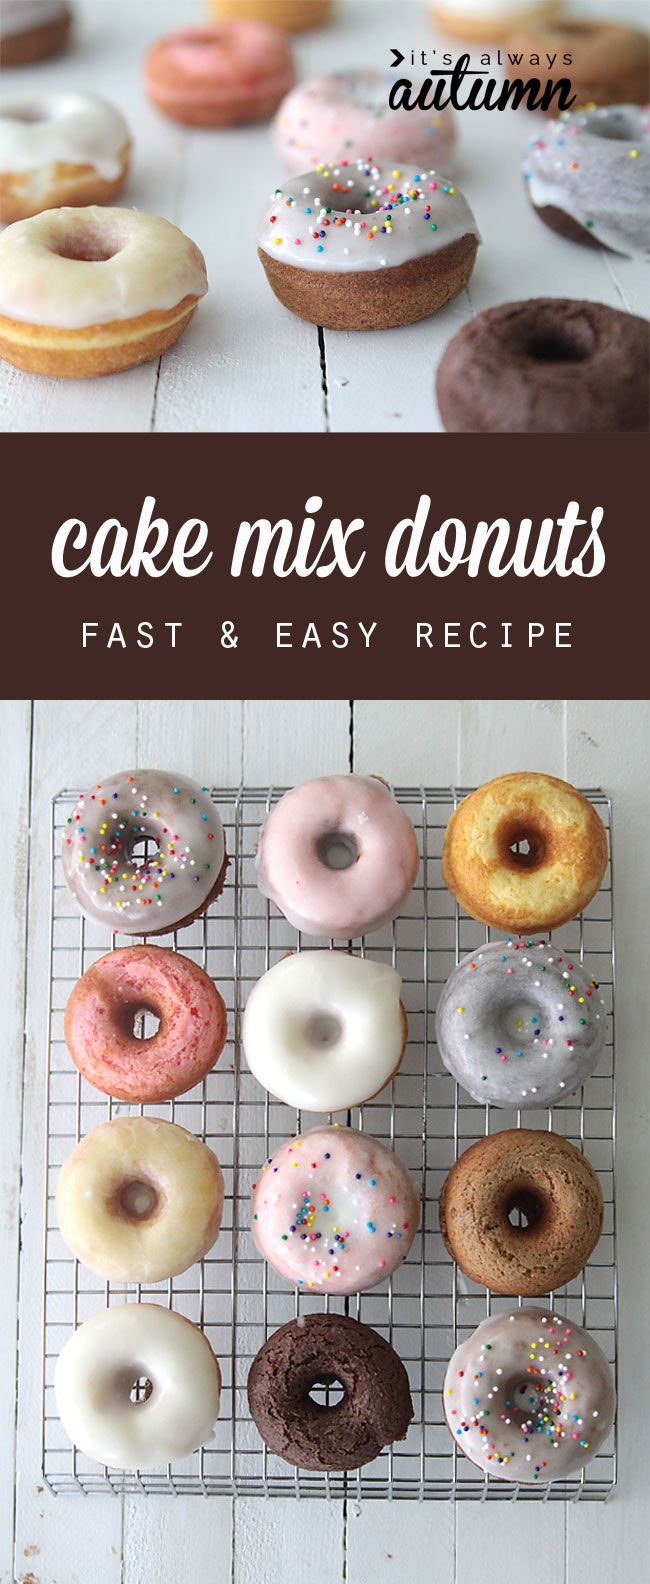 Cake mix donuts, easy baked recipe